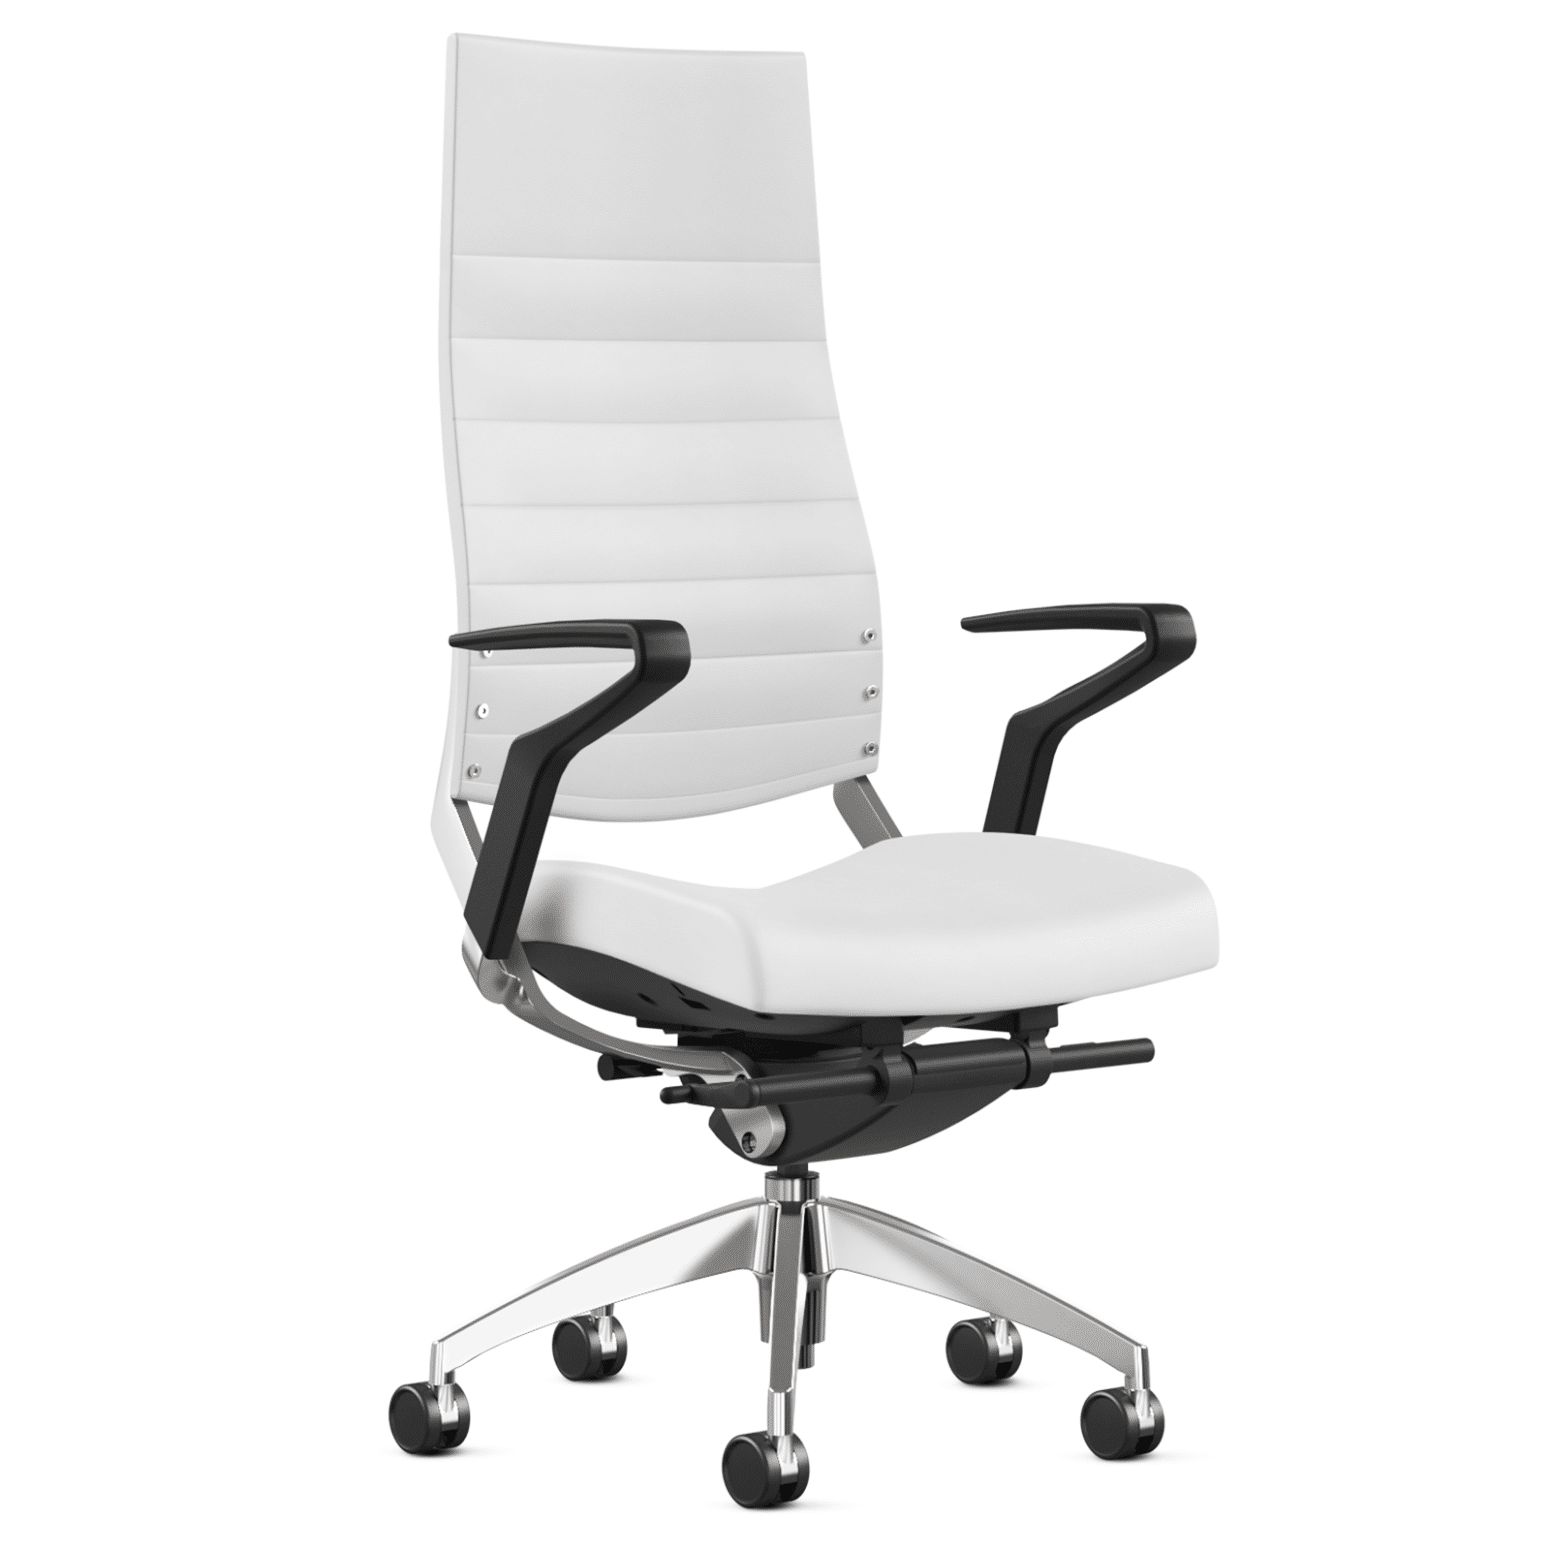 A modern and ergonomic executive chair with adjustable lumbar support and a polished aluminum base.